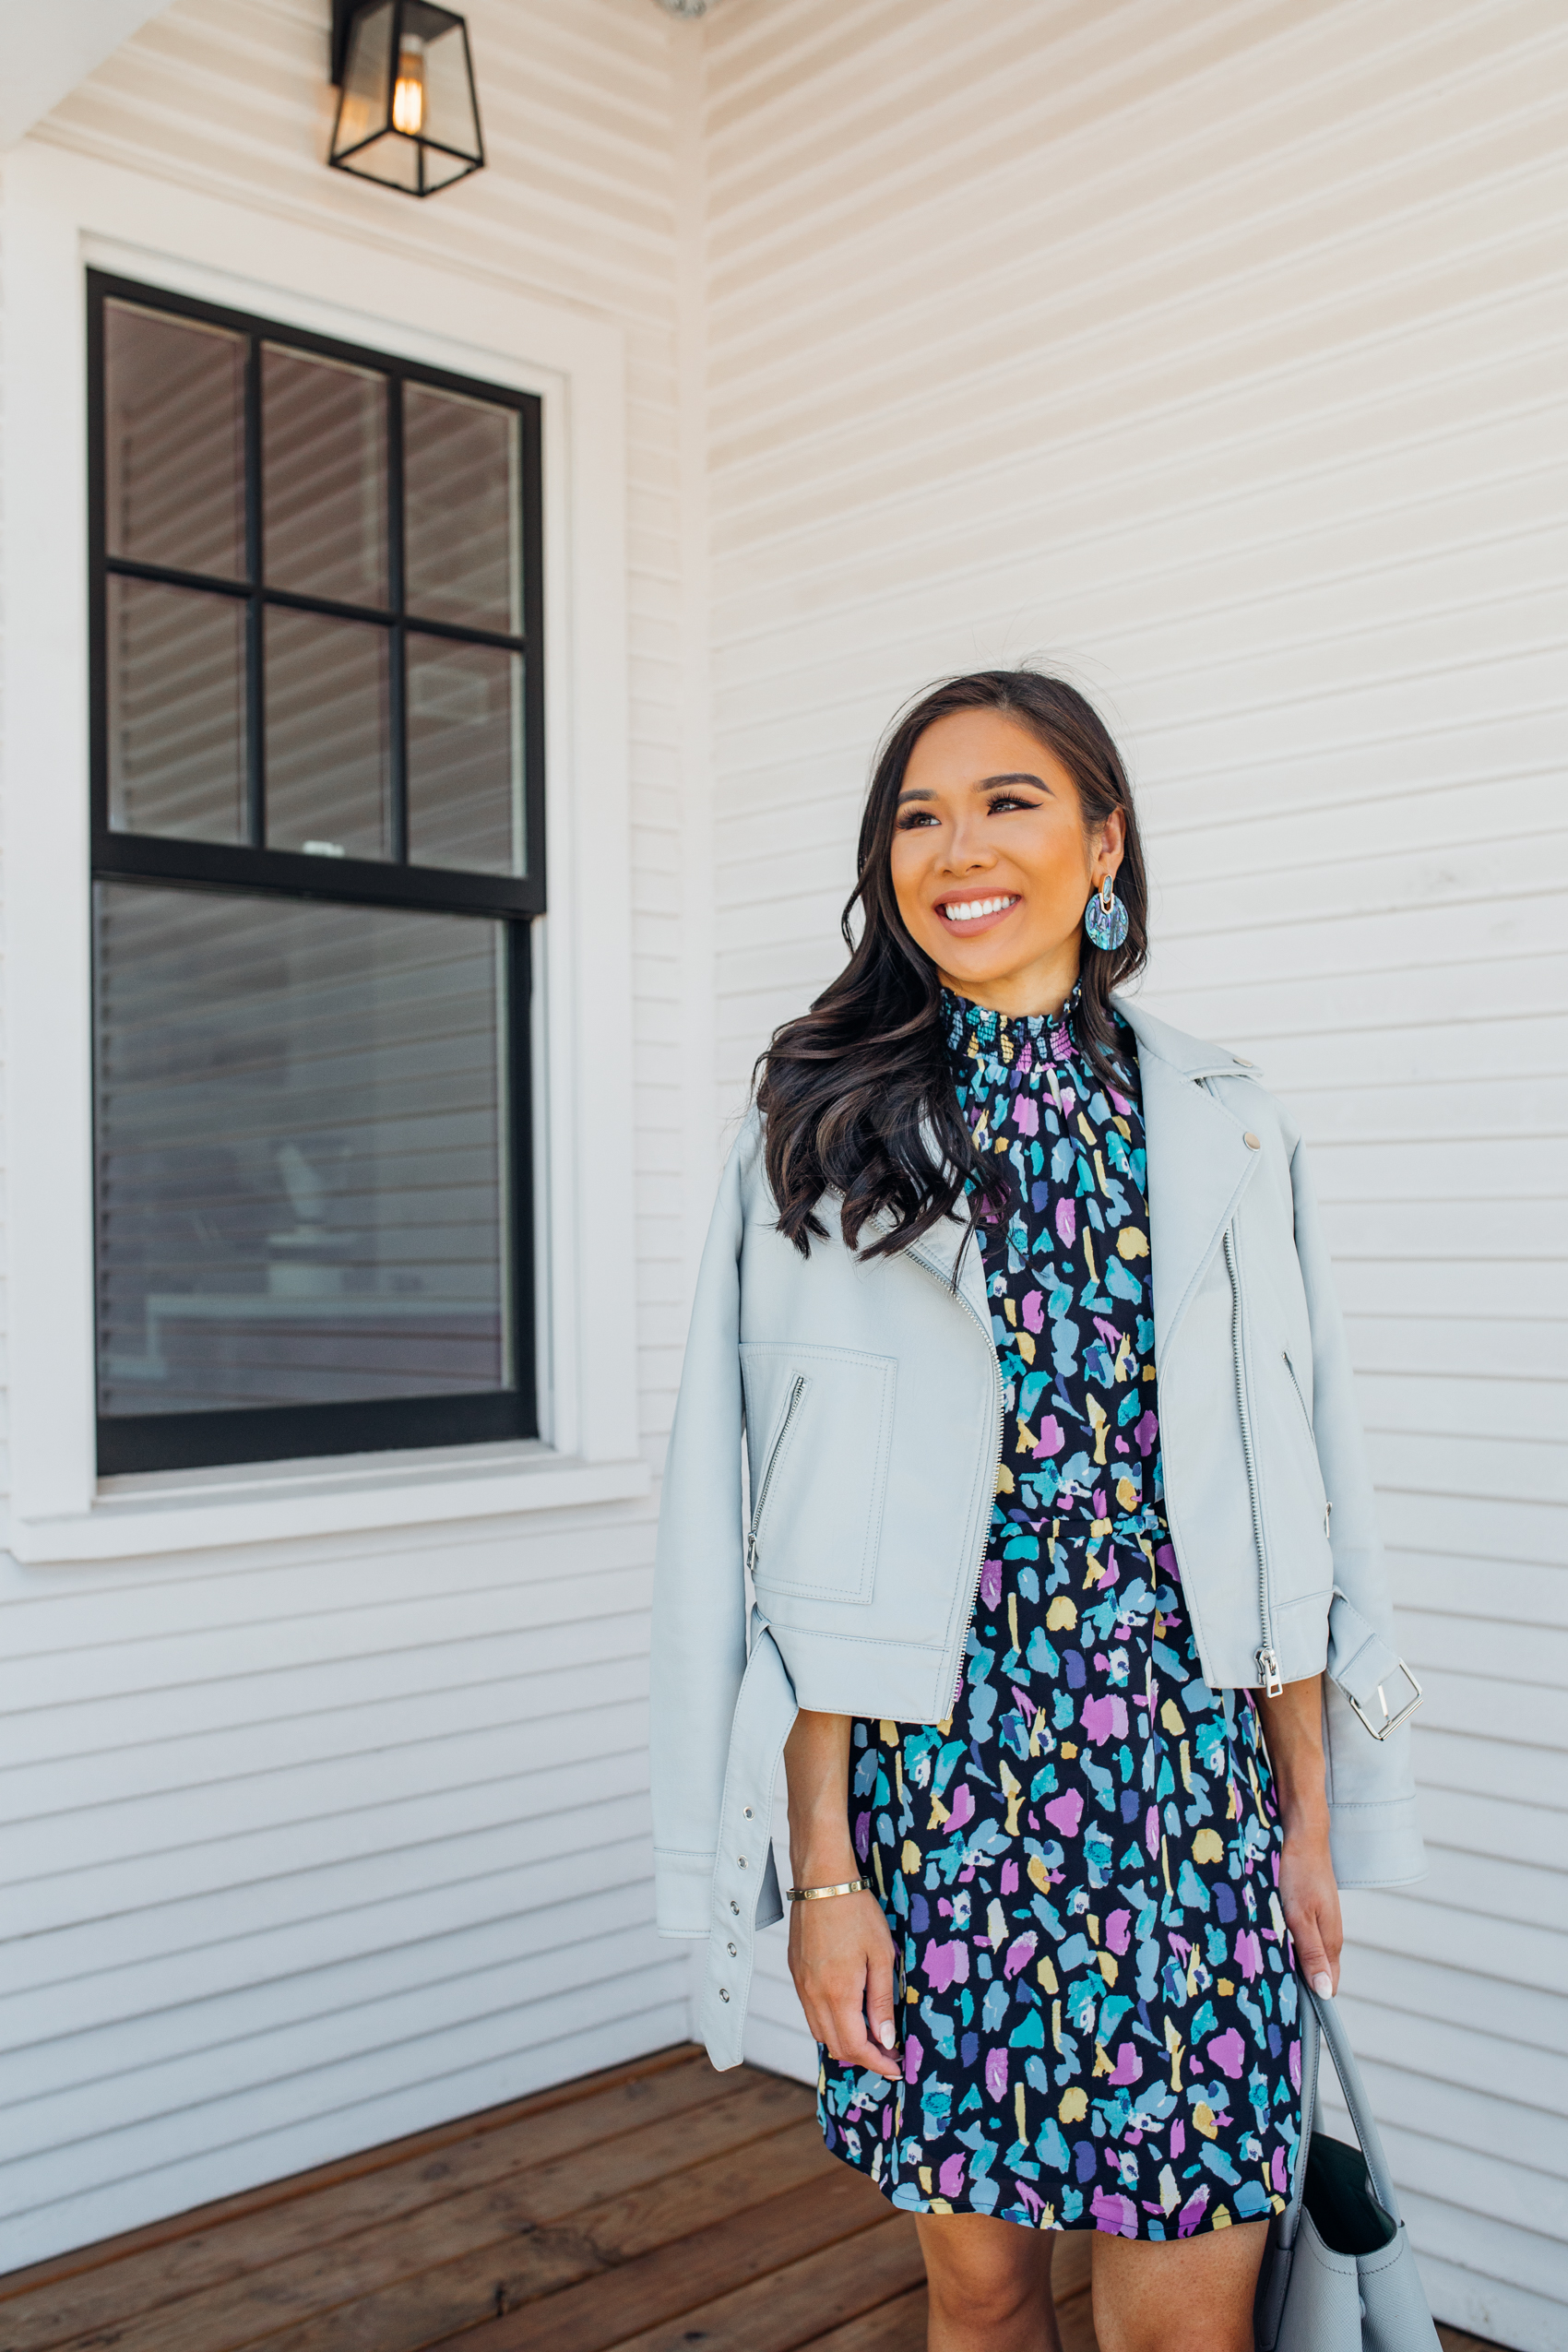 Blogger Hoang-Kim shares how to transition an outfit from summer to fall with a Gibson dress, Topshop leather jacket and Kendra Scott Didi earrings